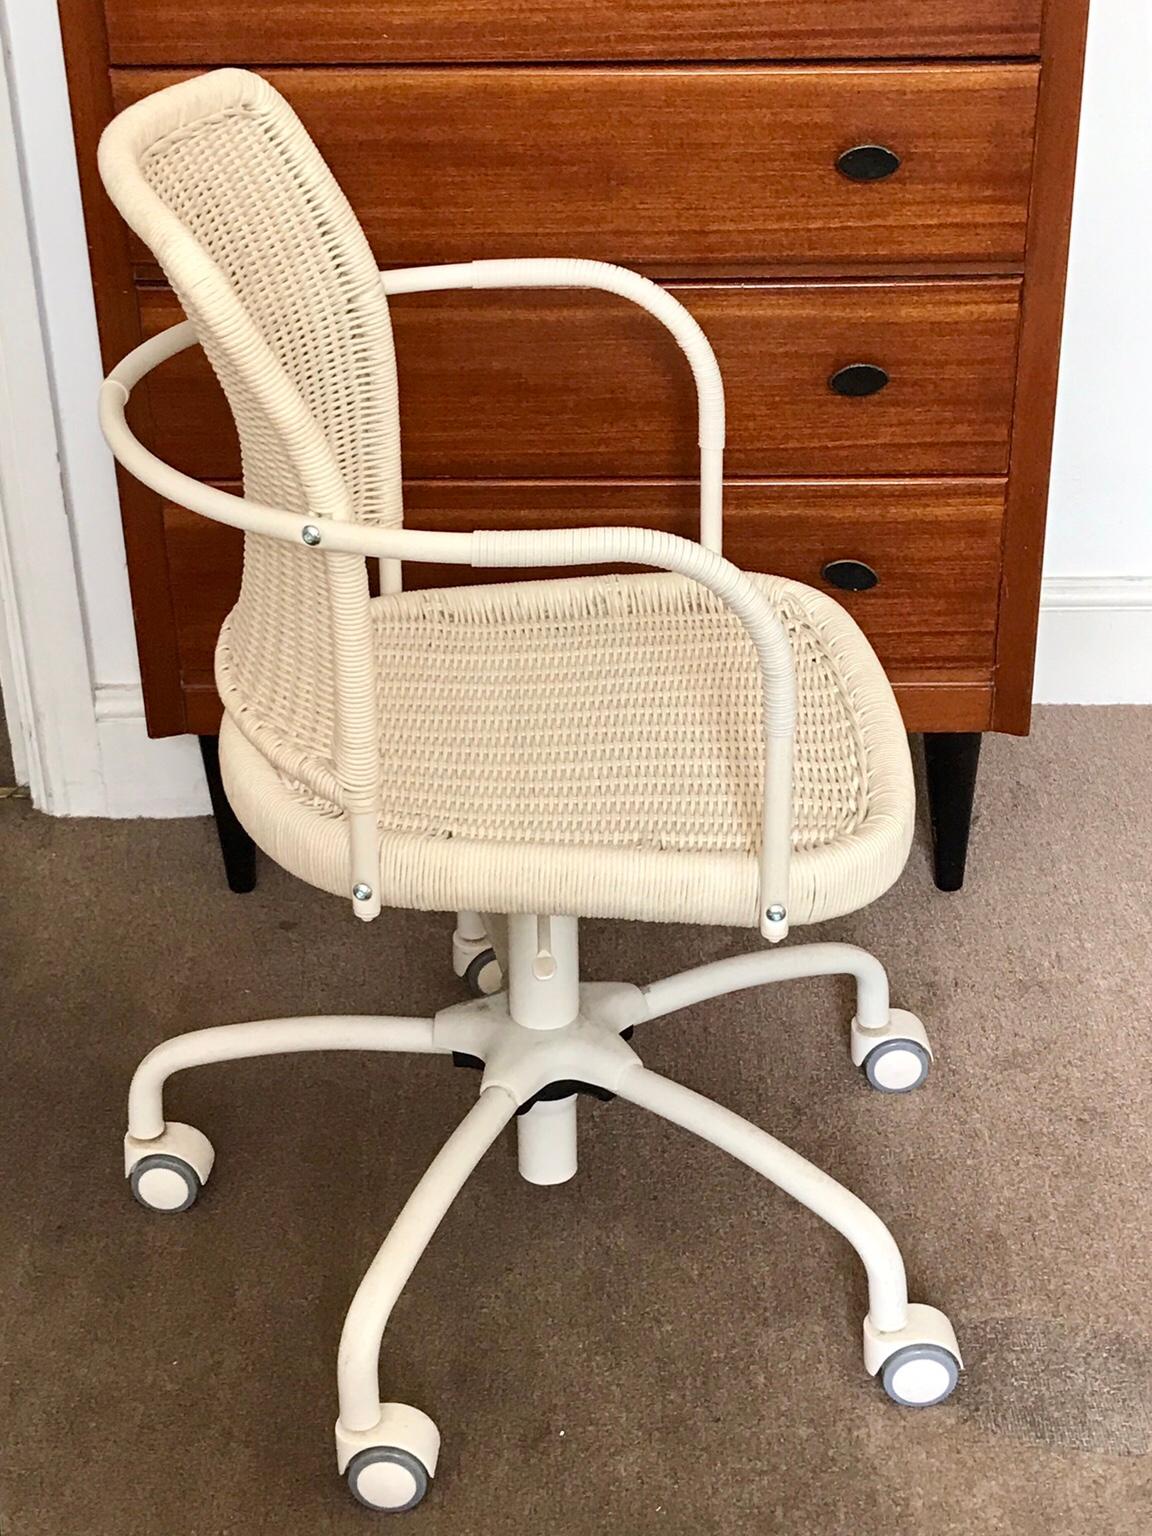 IKEA Cream off white rattan office chair in E8 Hackney for